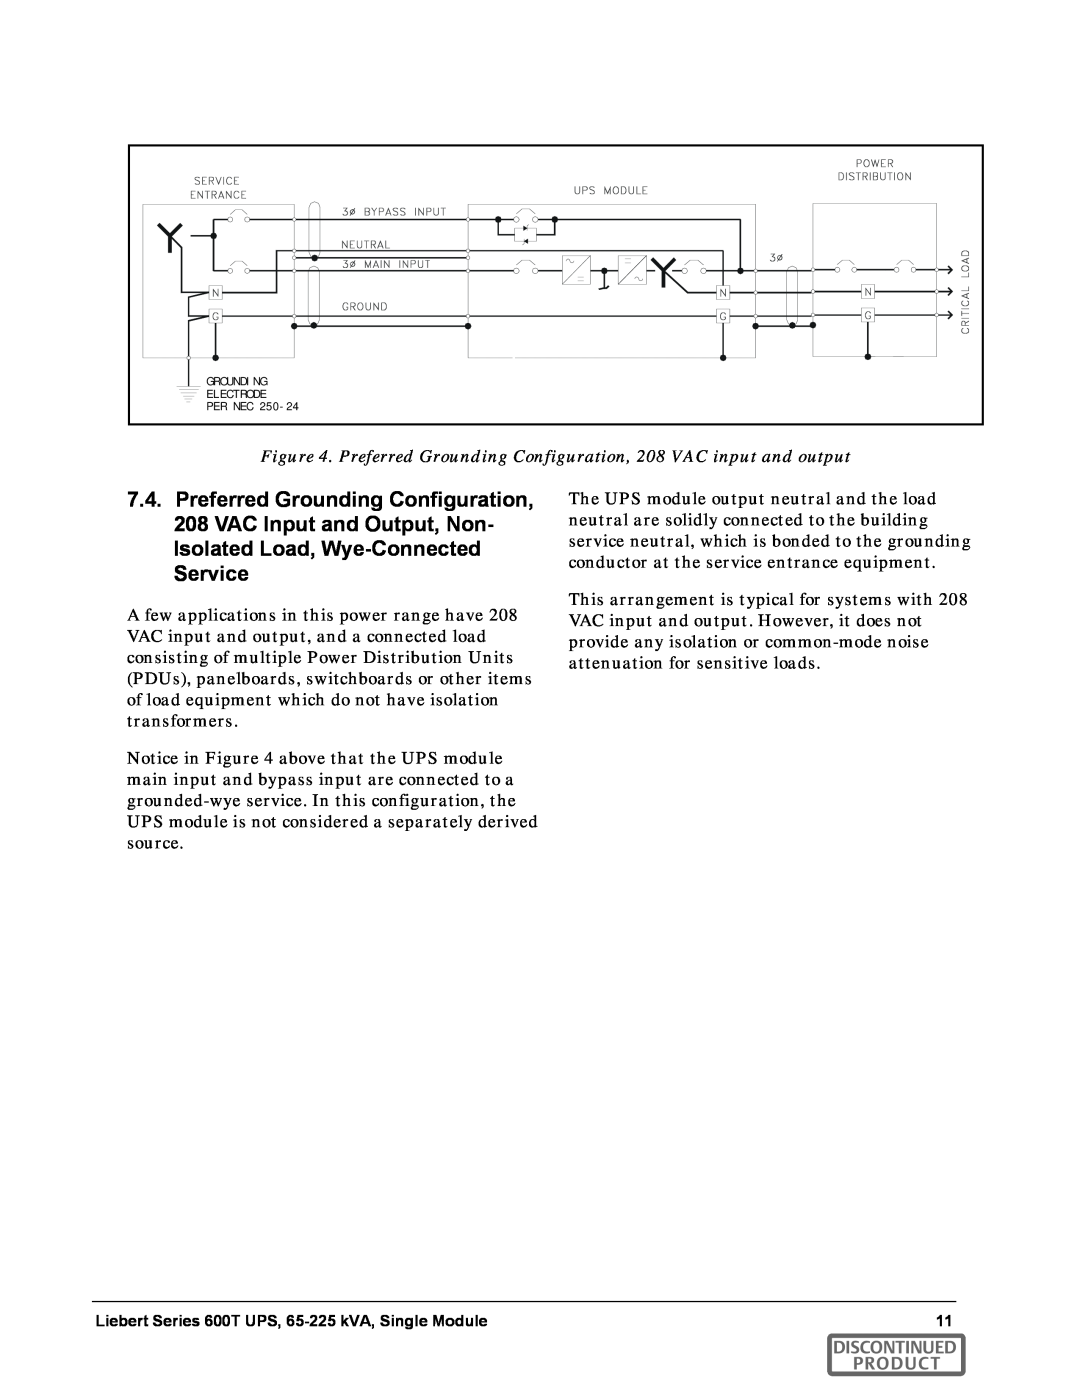 Emerson SERIES 600T manual Preferred Grounding Configuration, 208 VAC input and output, Product, Discontinued 